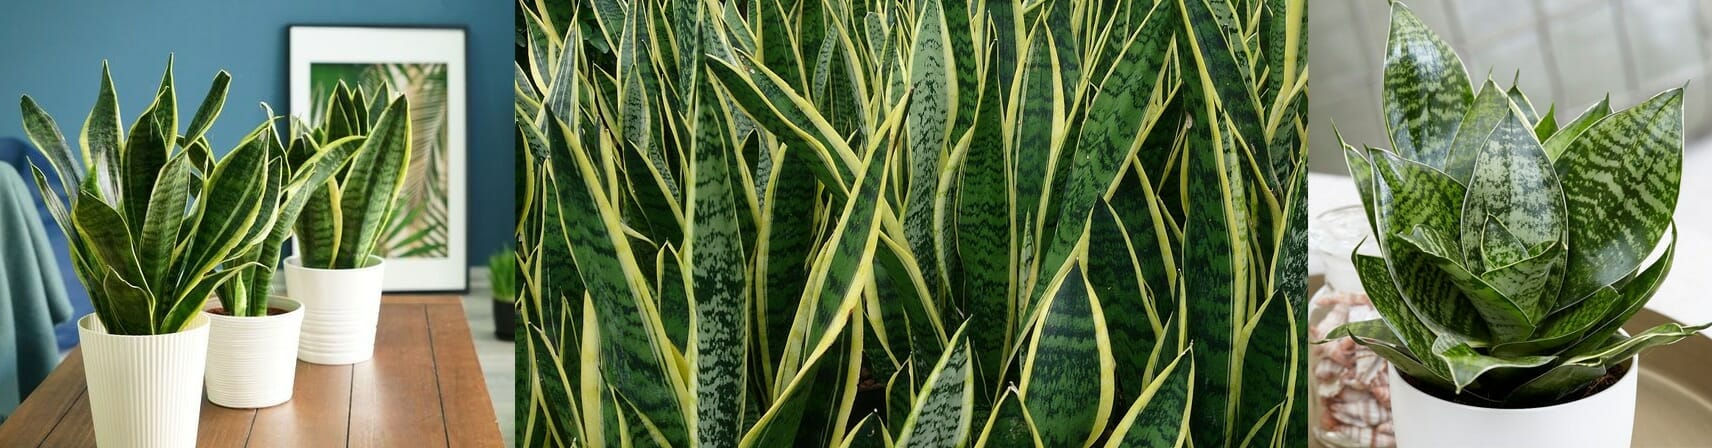 Sansevieria trifasciata Snake plant Mothers in law tongue